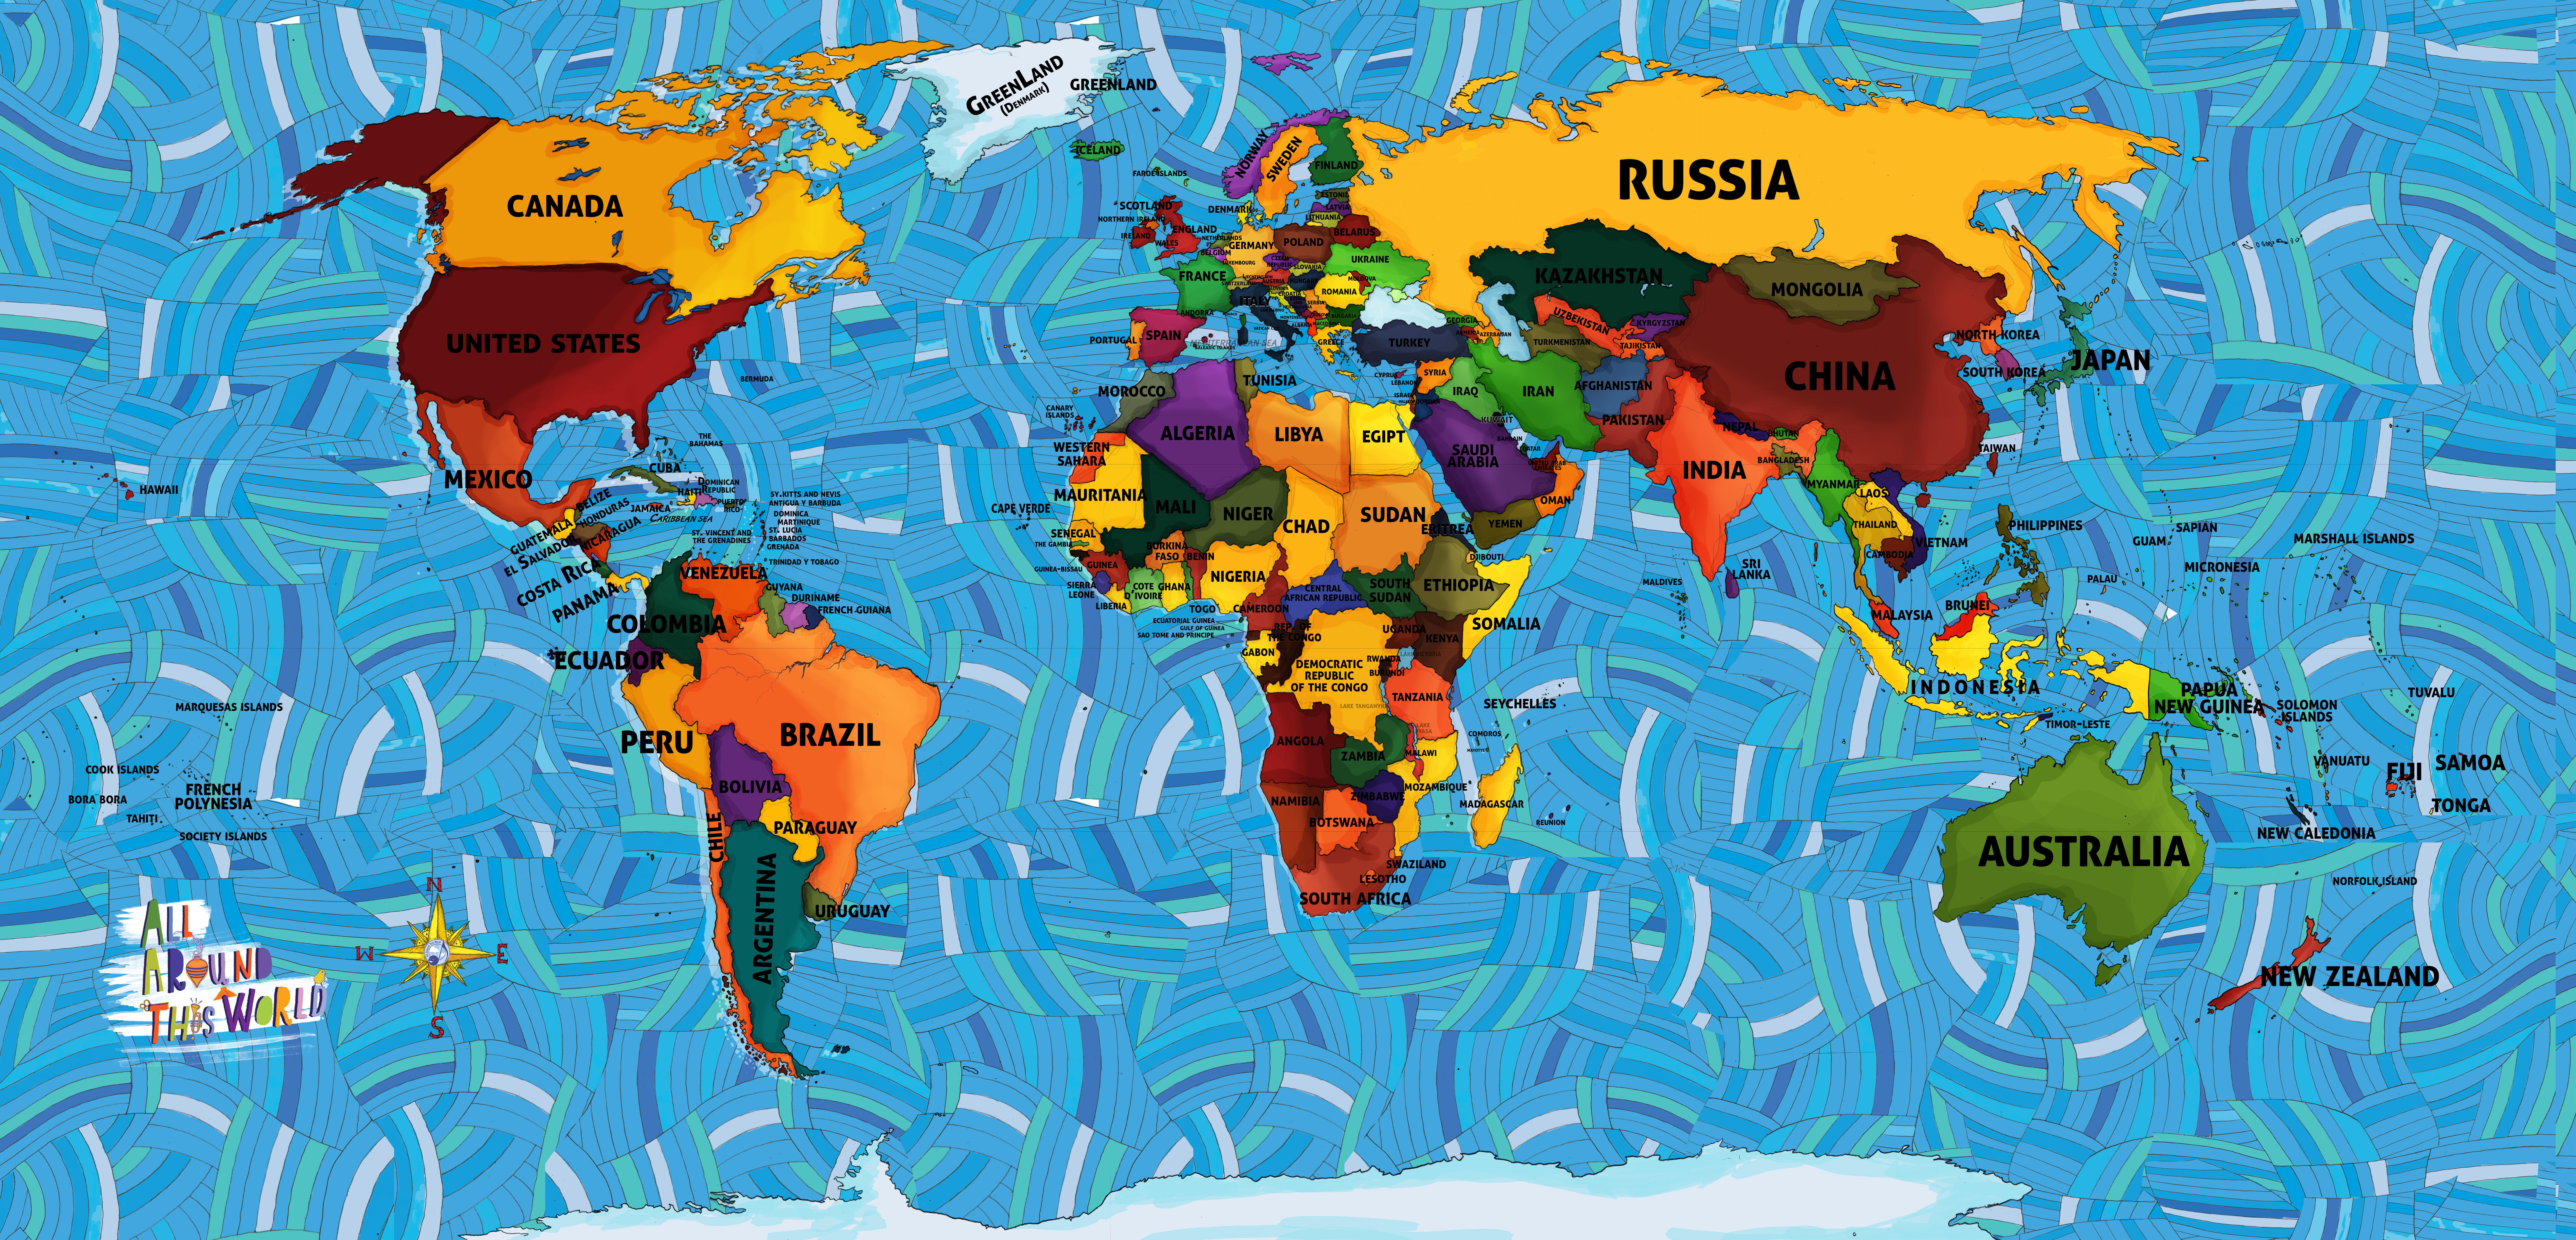 All Around This World Global "Everywhere Map"